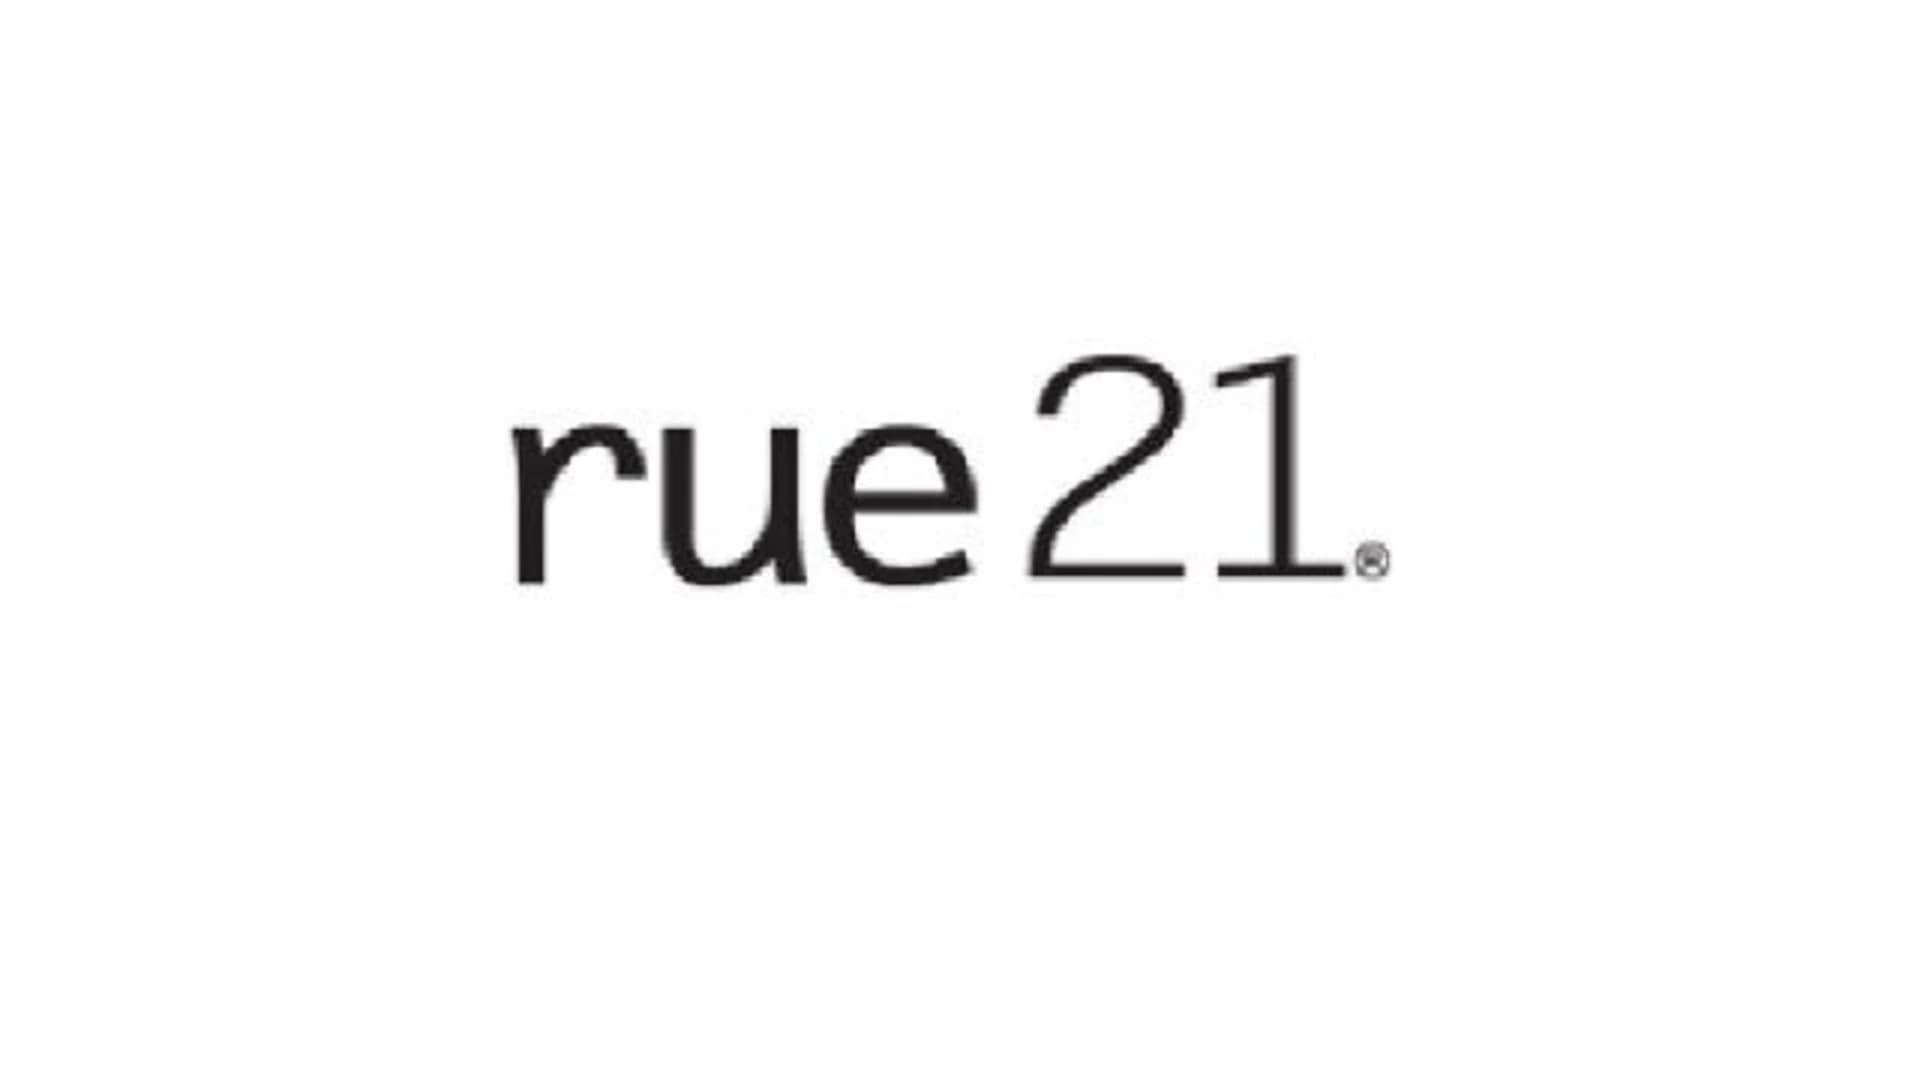 Teen retailer rue21 to close 400 stores, including 4 in NJ